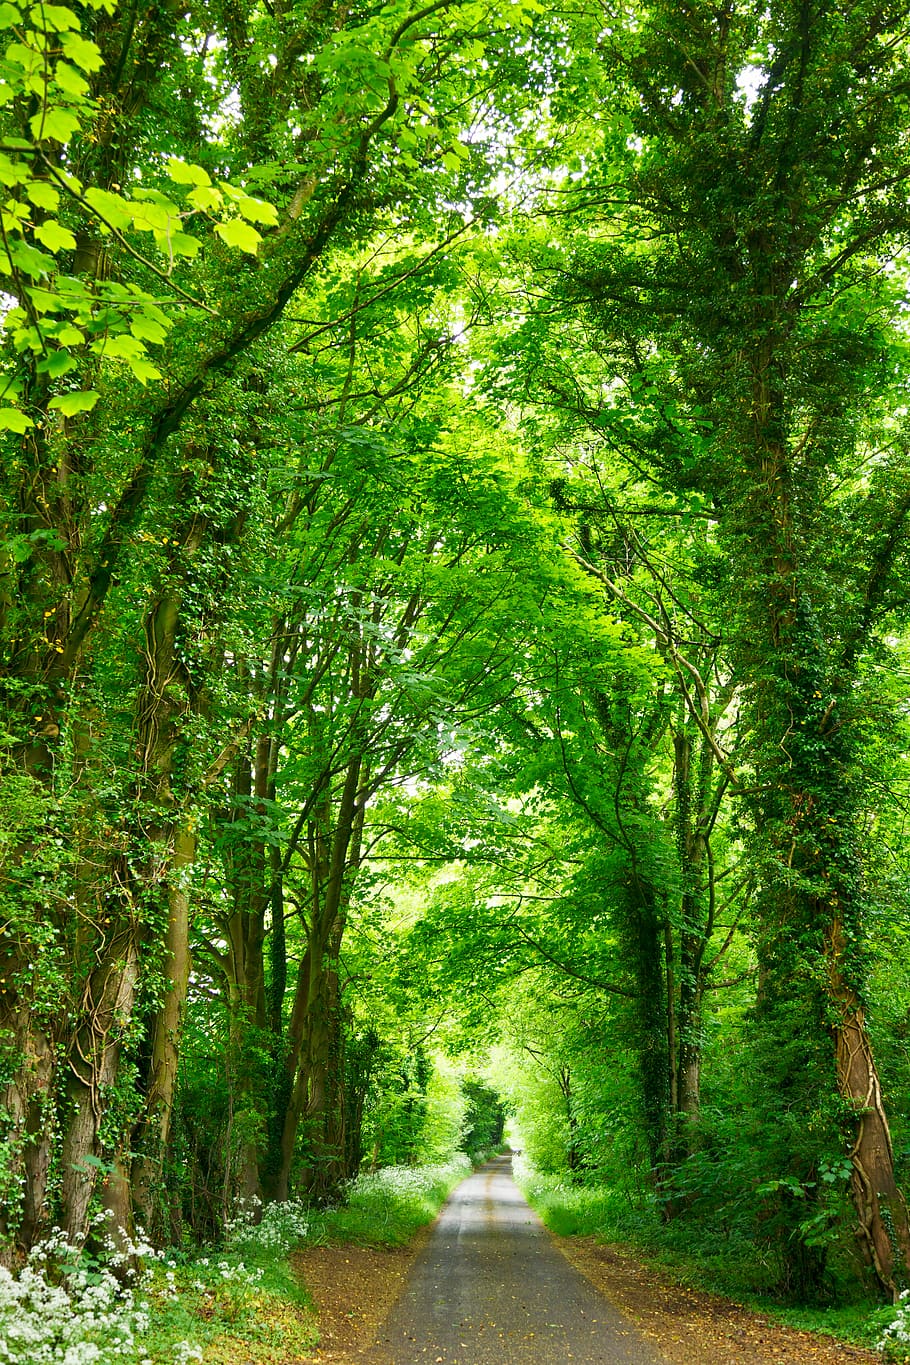 gray concrete road top between green trees, photo of black concrete road betweet trees